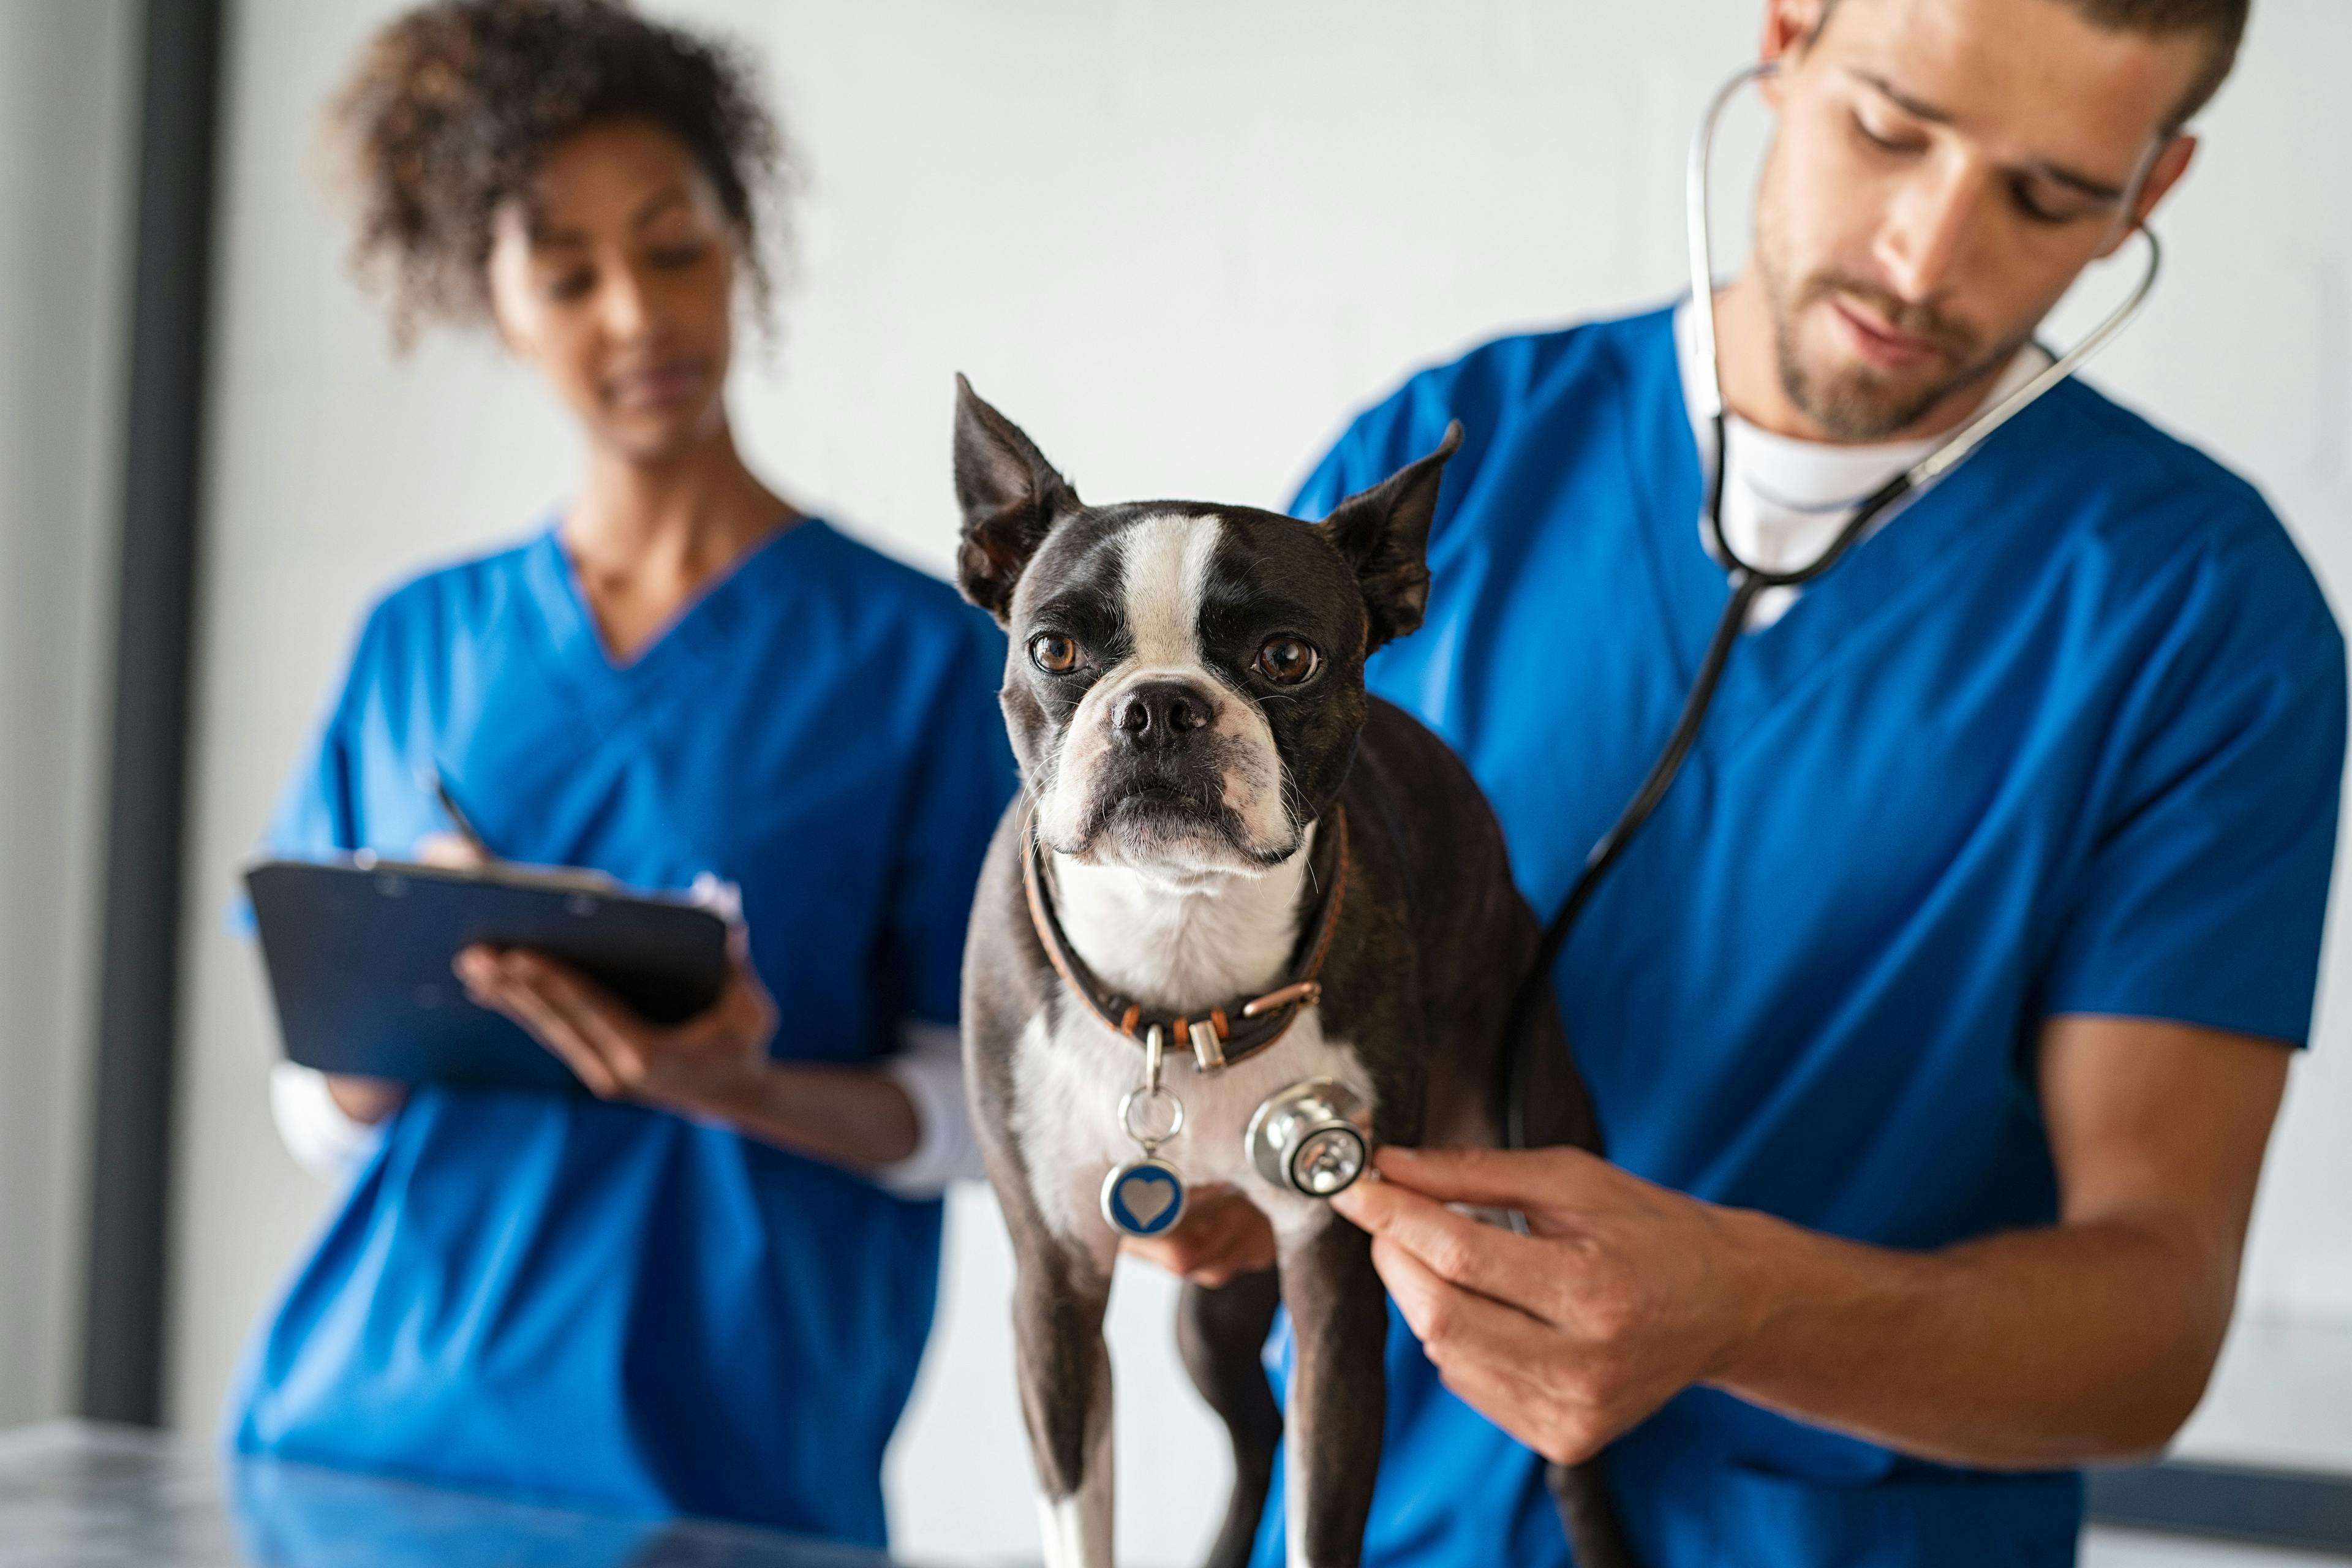 Five ways the veterinary team can help new grads succeed